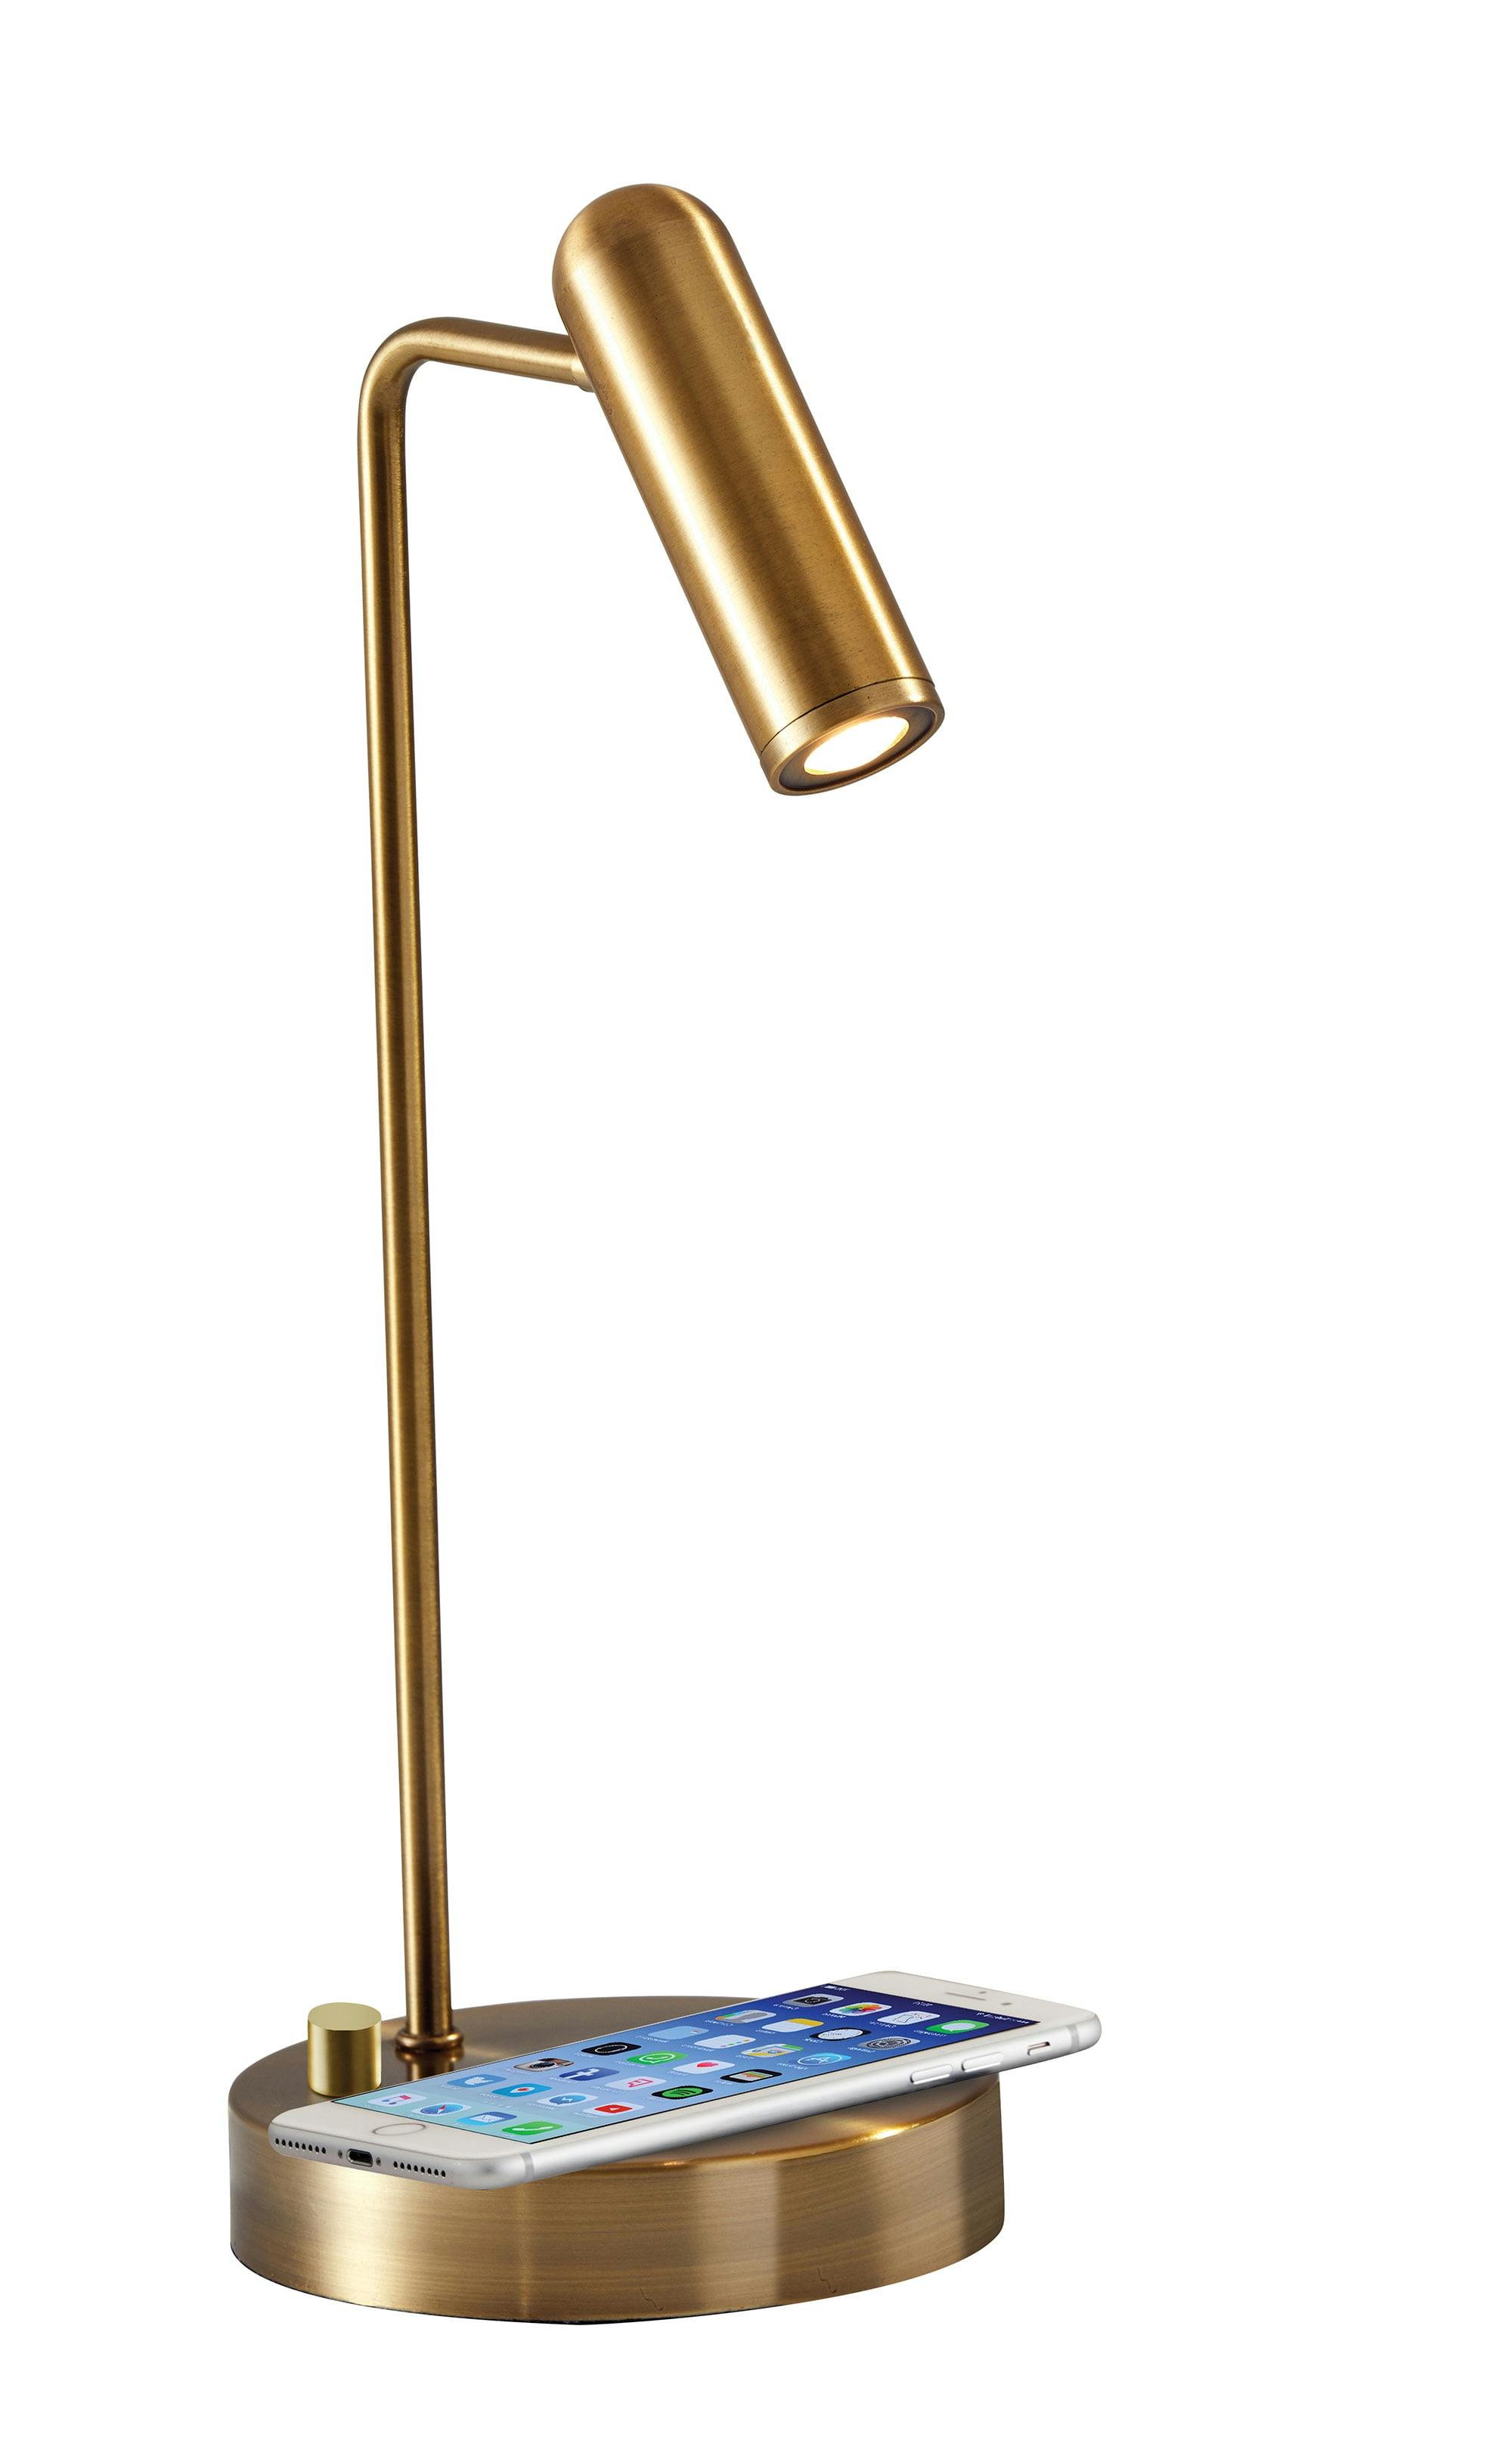 AdessoCharge 17" Antique Brass LED Desk Lamp with Wireless Charging